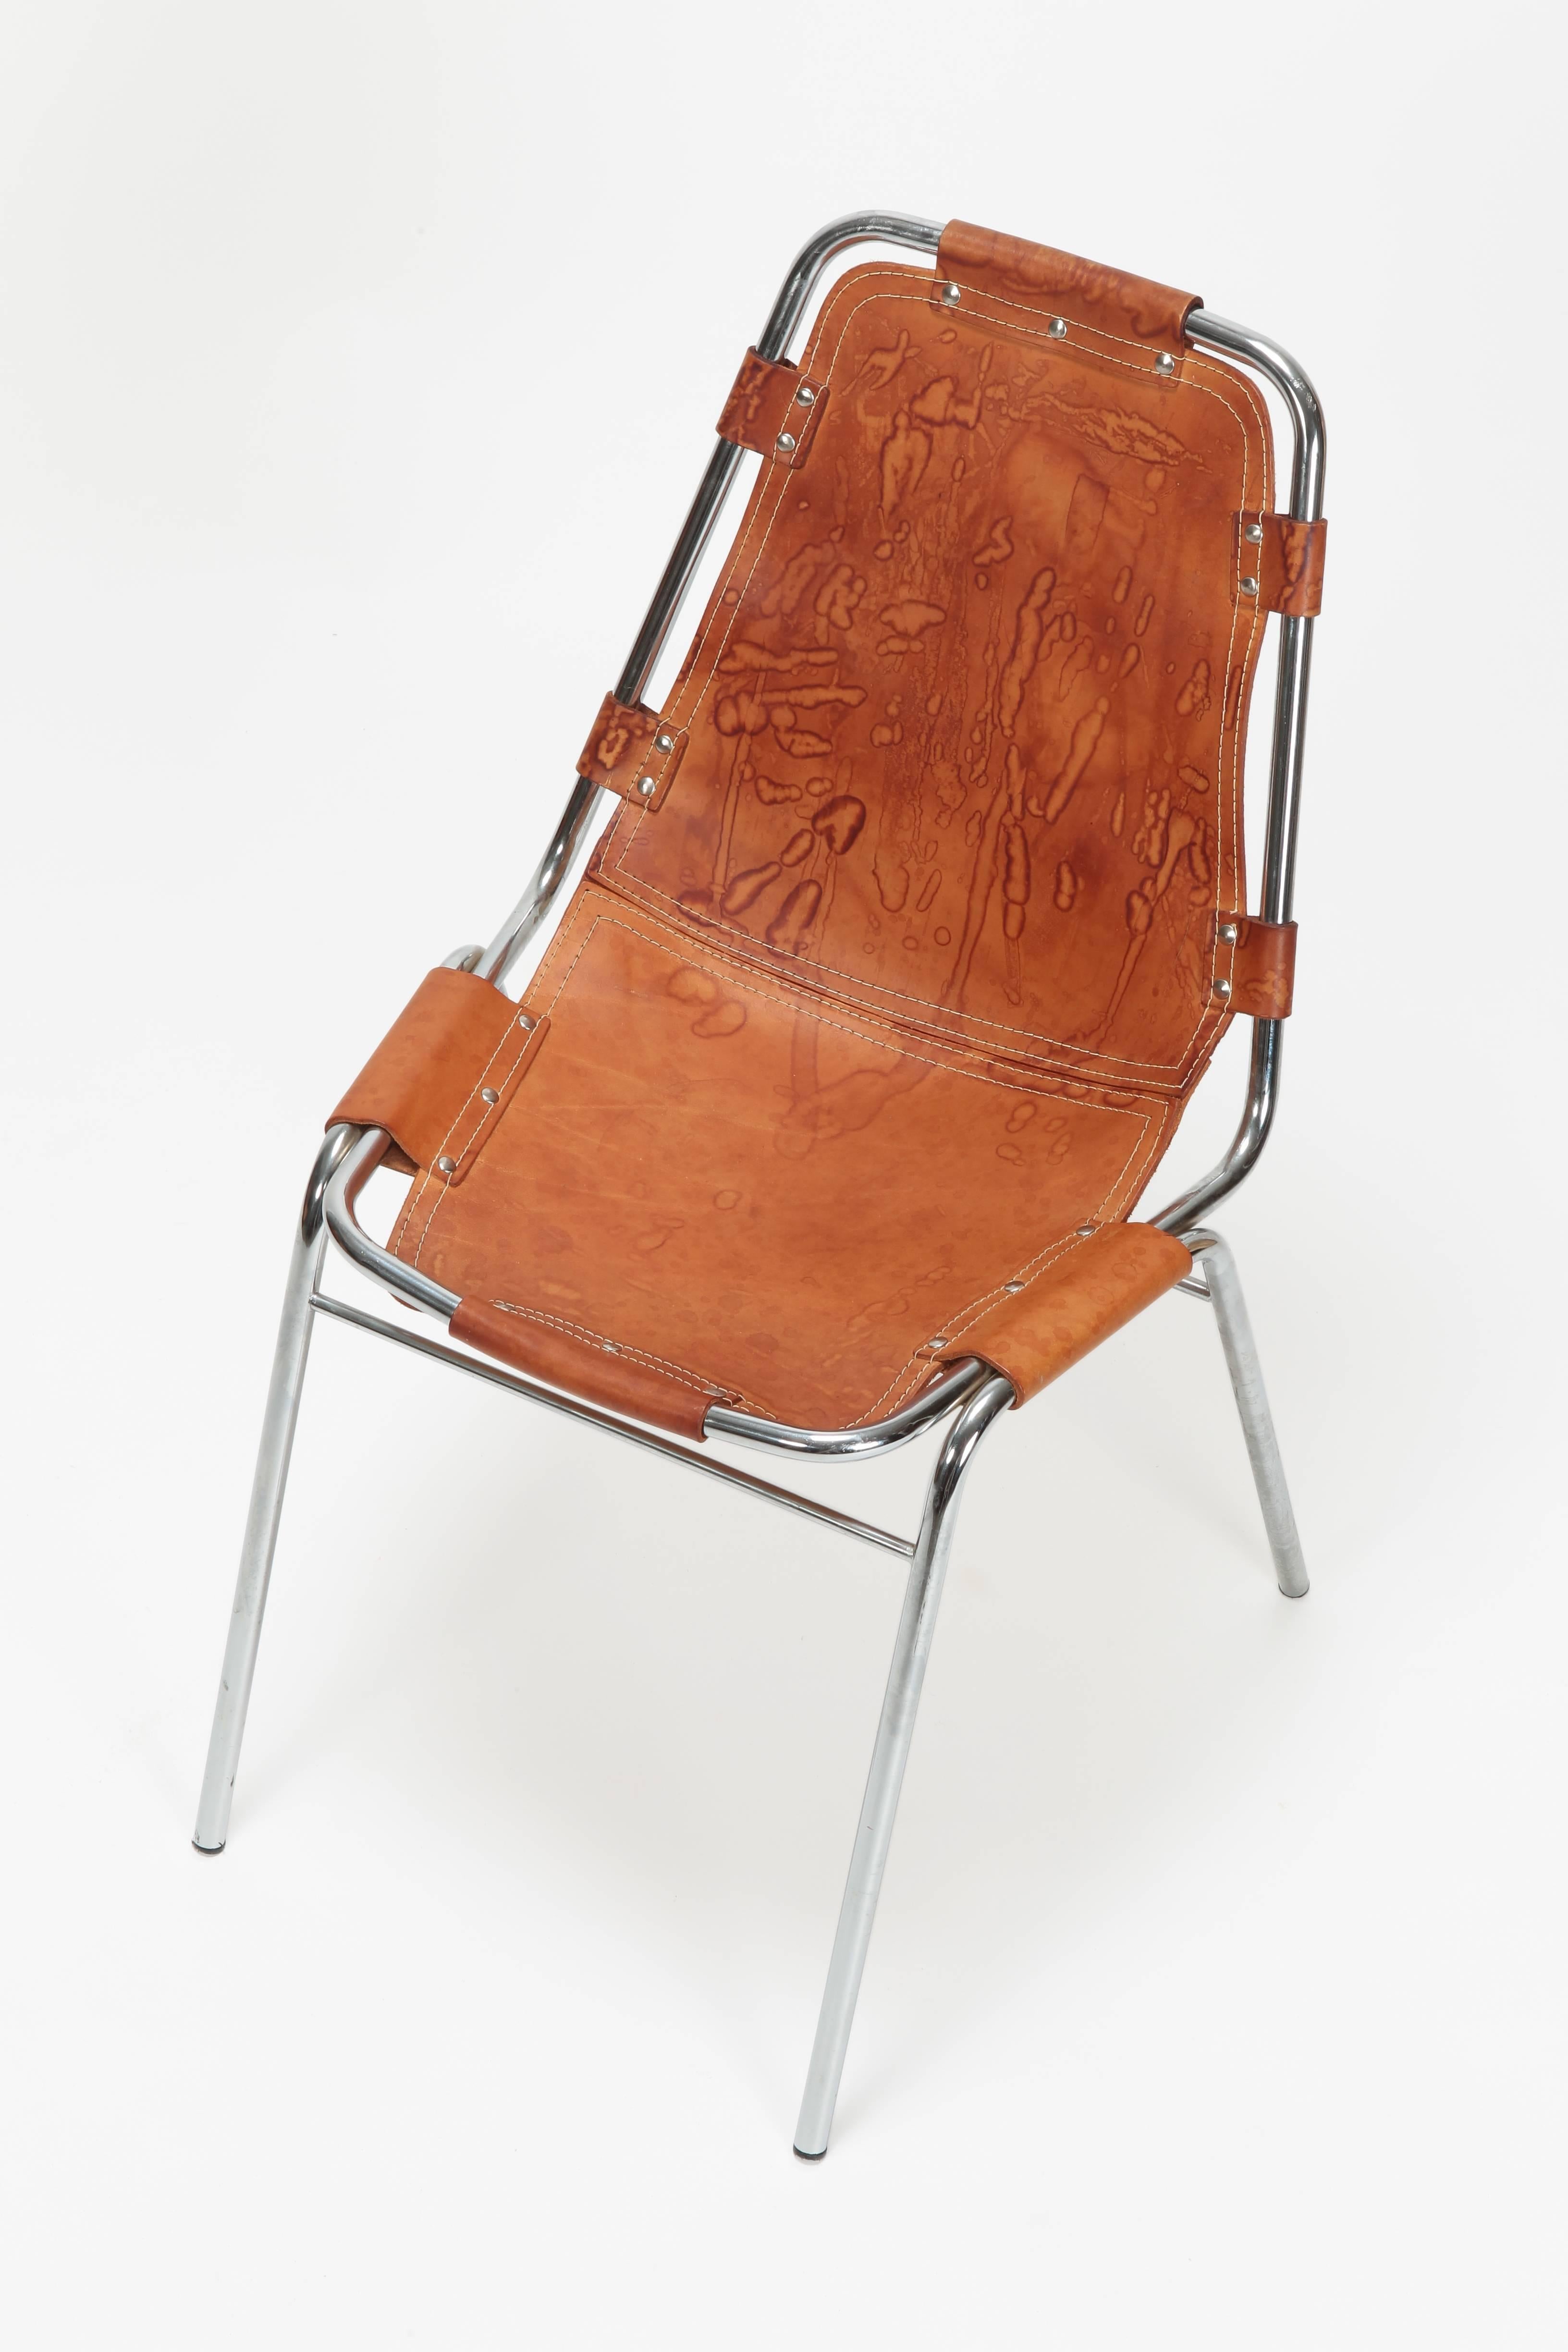 Charlotte Perriand chair Les Arc manufactured by Cassina in den the 1960s. A rare an beautiful leather and chromed tubular chair designed by Charlotte Perrian for the ski resort Les Arc.